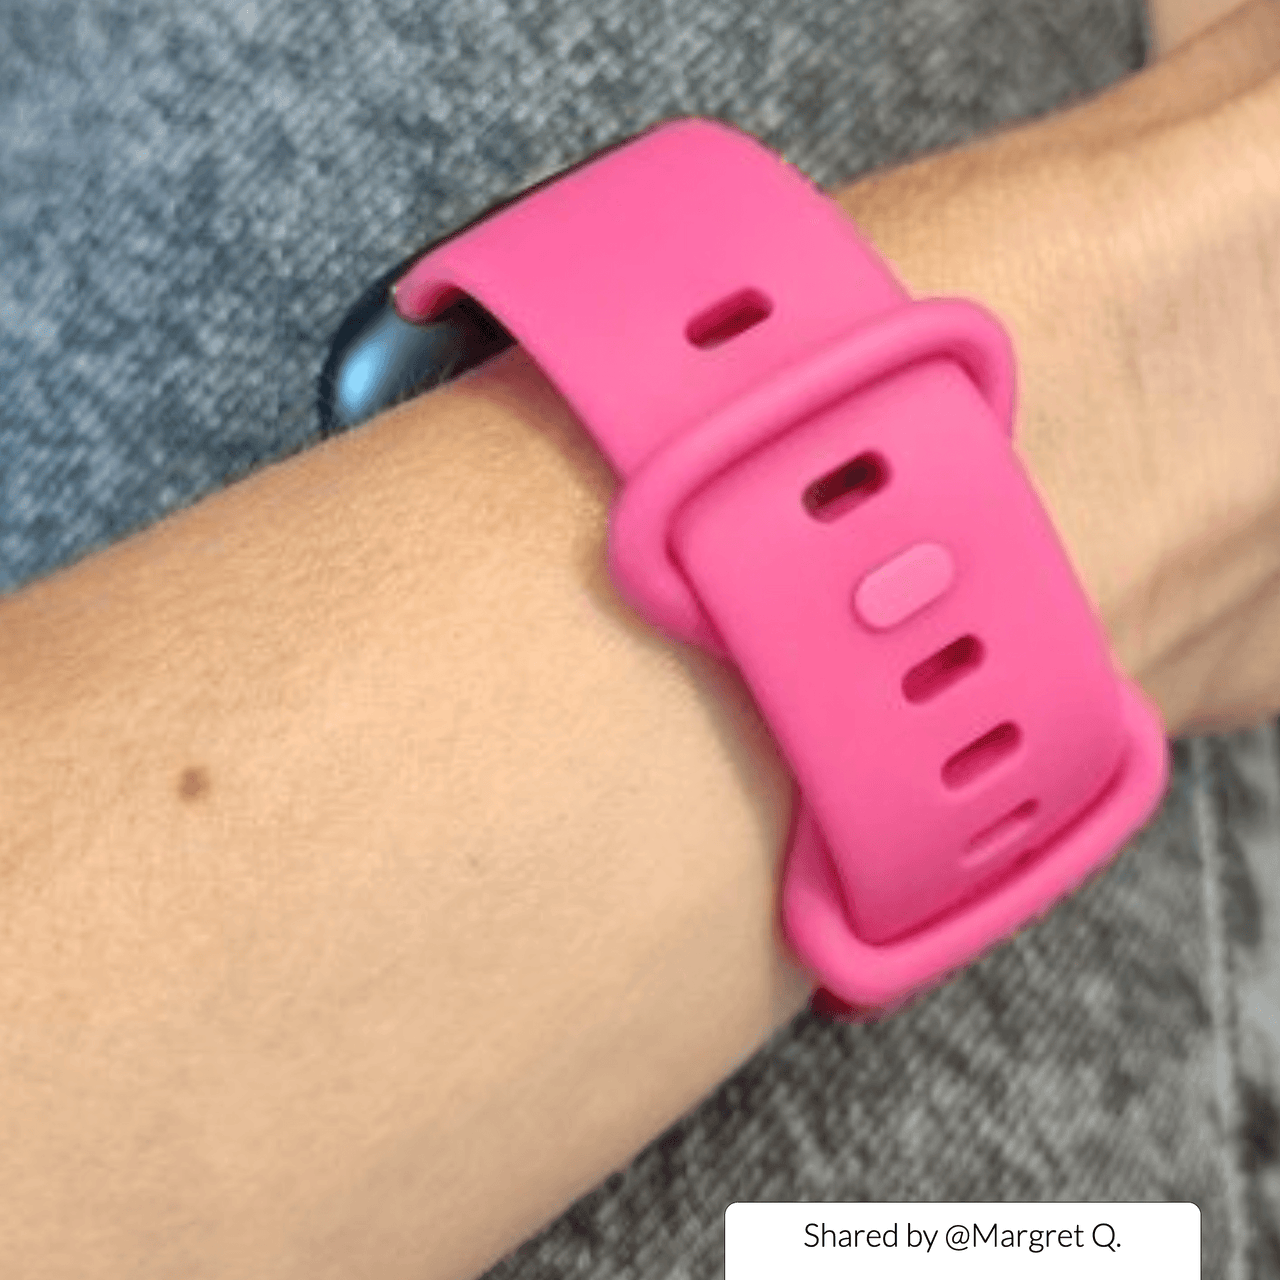 Soft Silicone Strap for Fitbit Versa 3 - watchband.direct